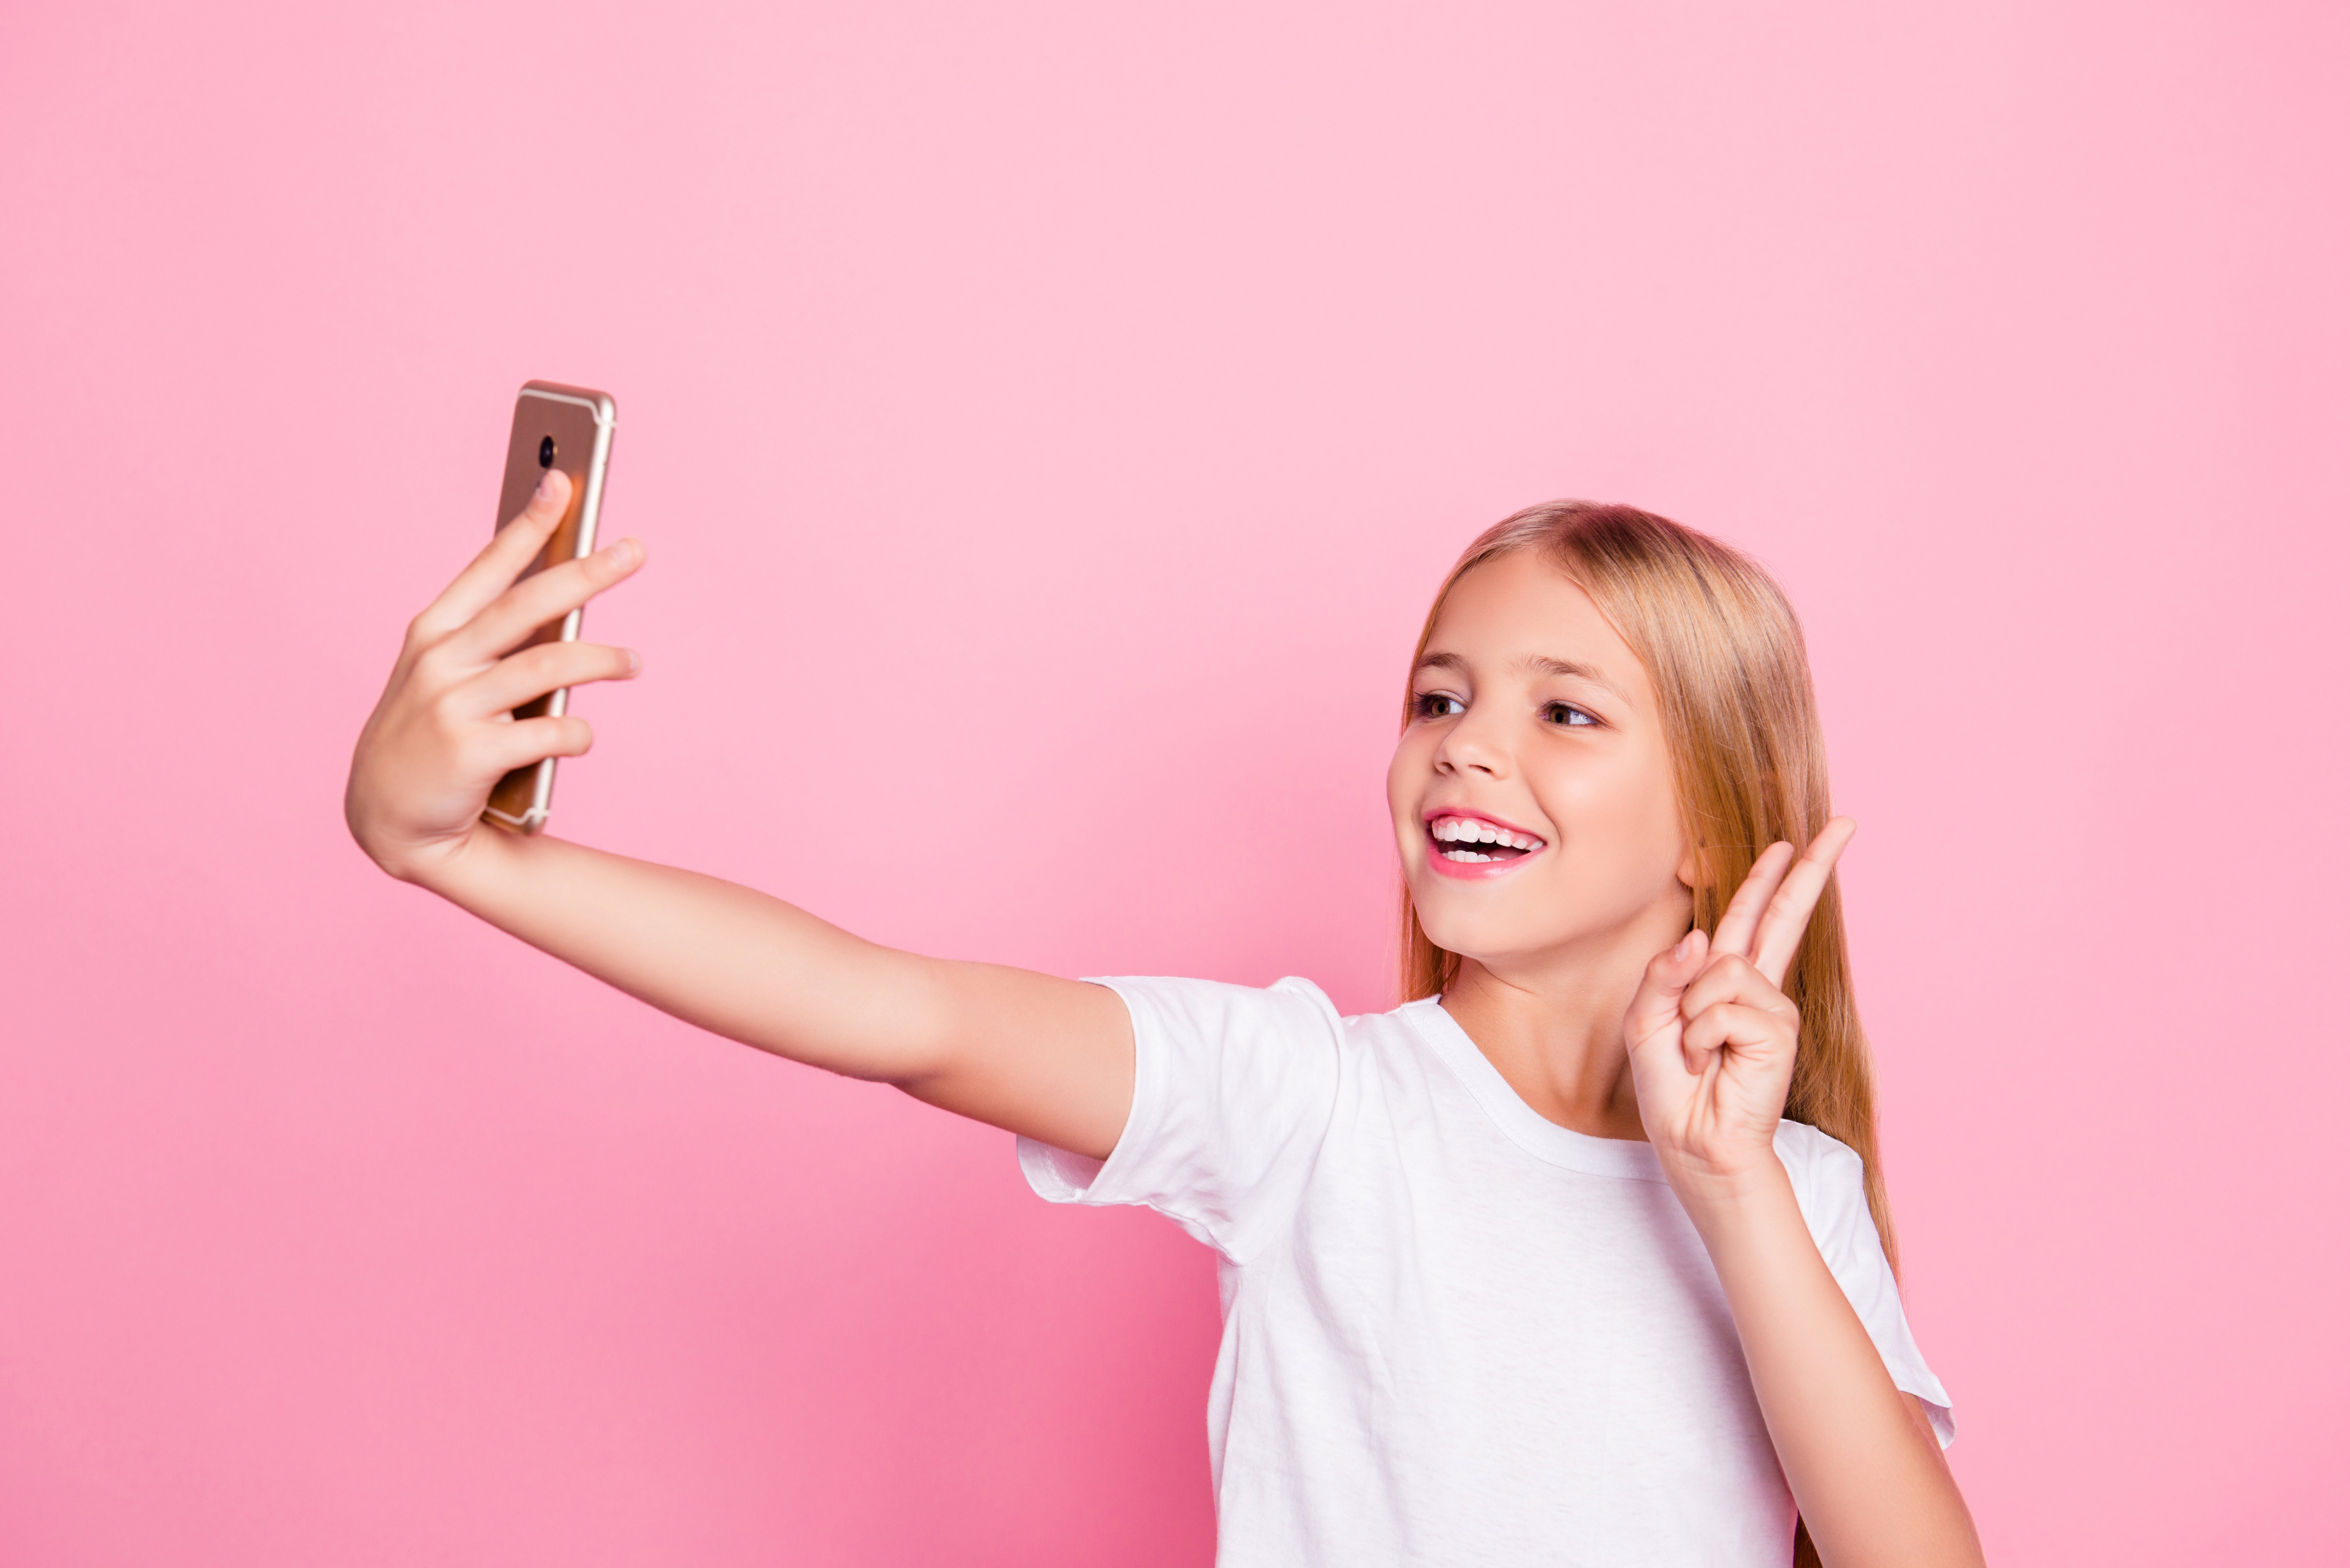 young girl holding phone and making peace sign to take selfie with cell phone